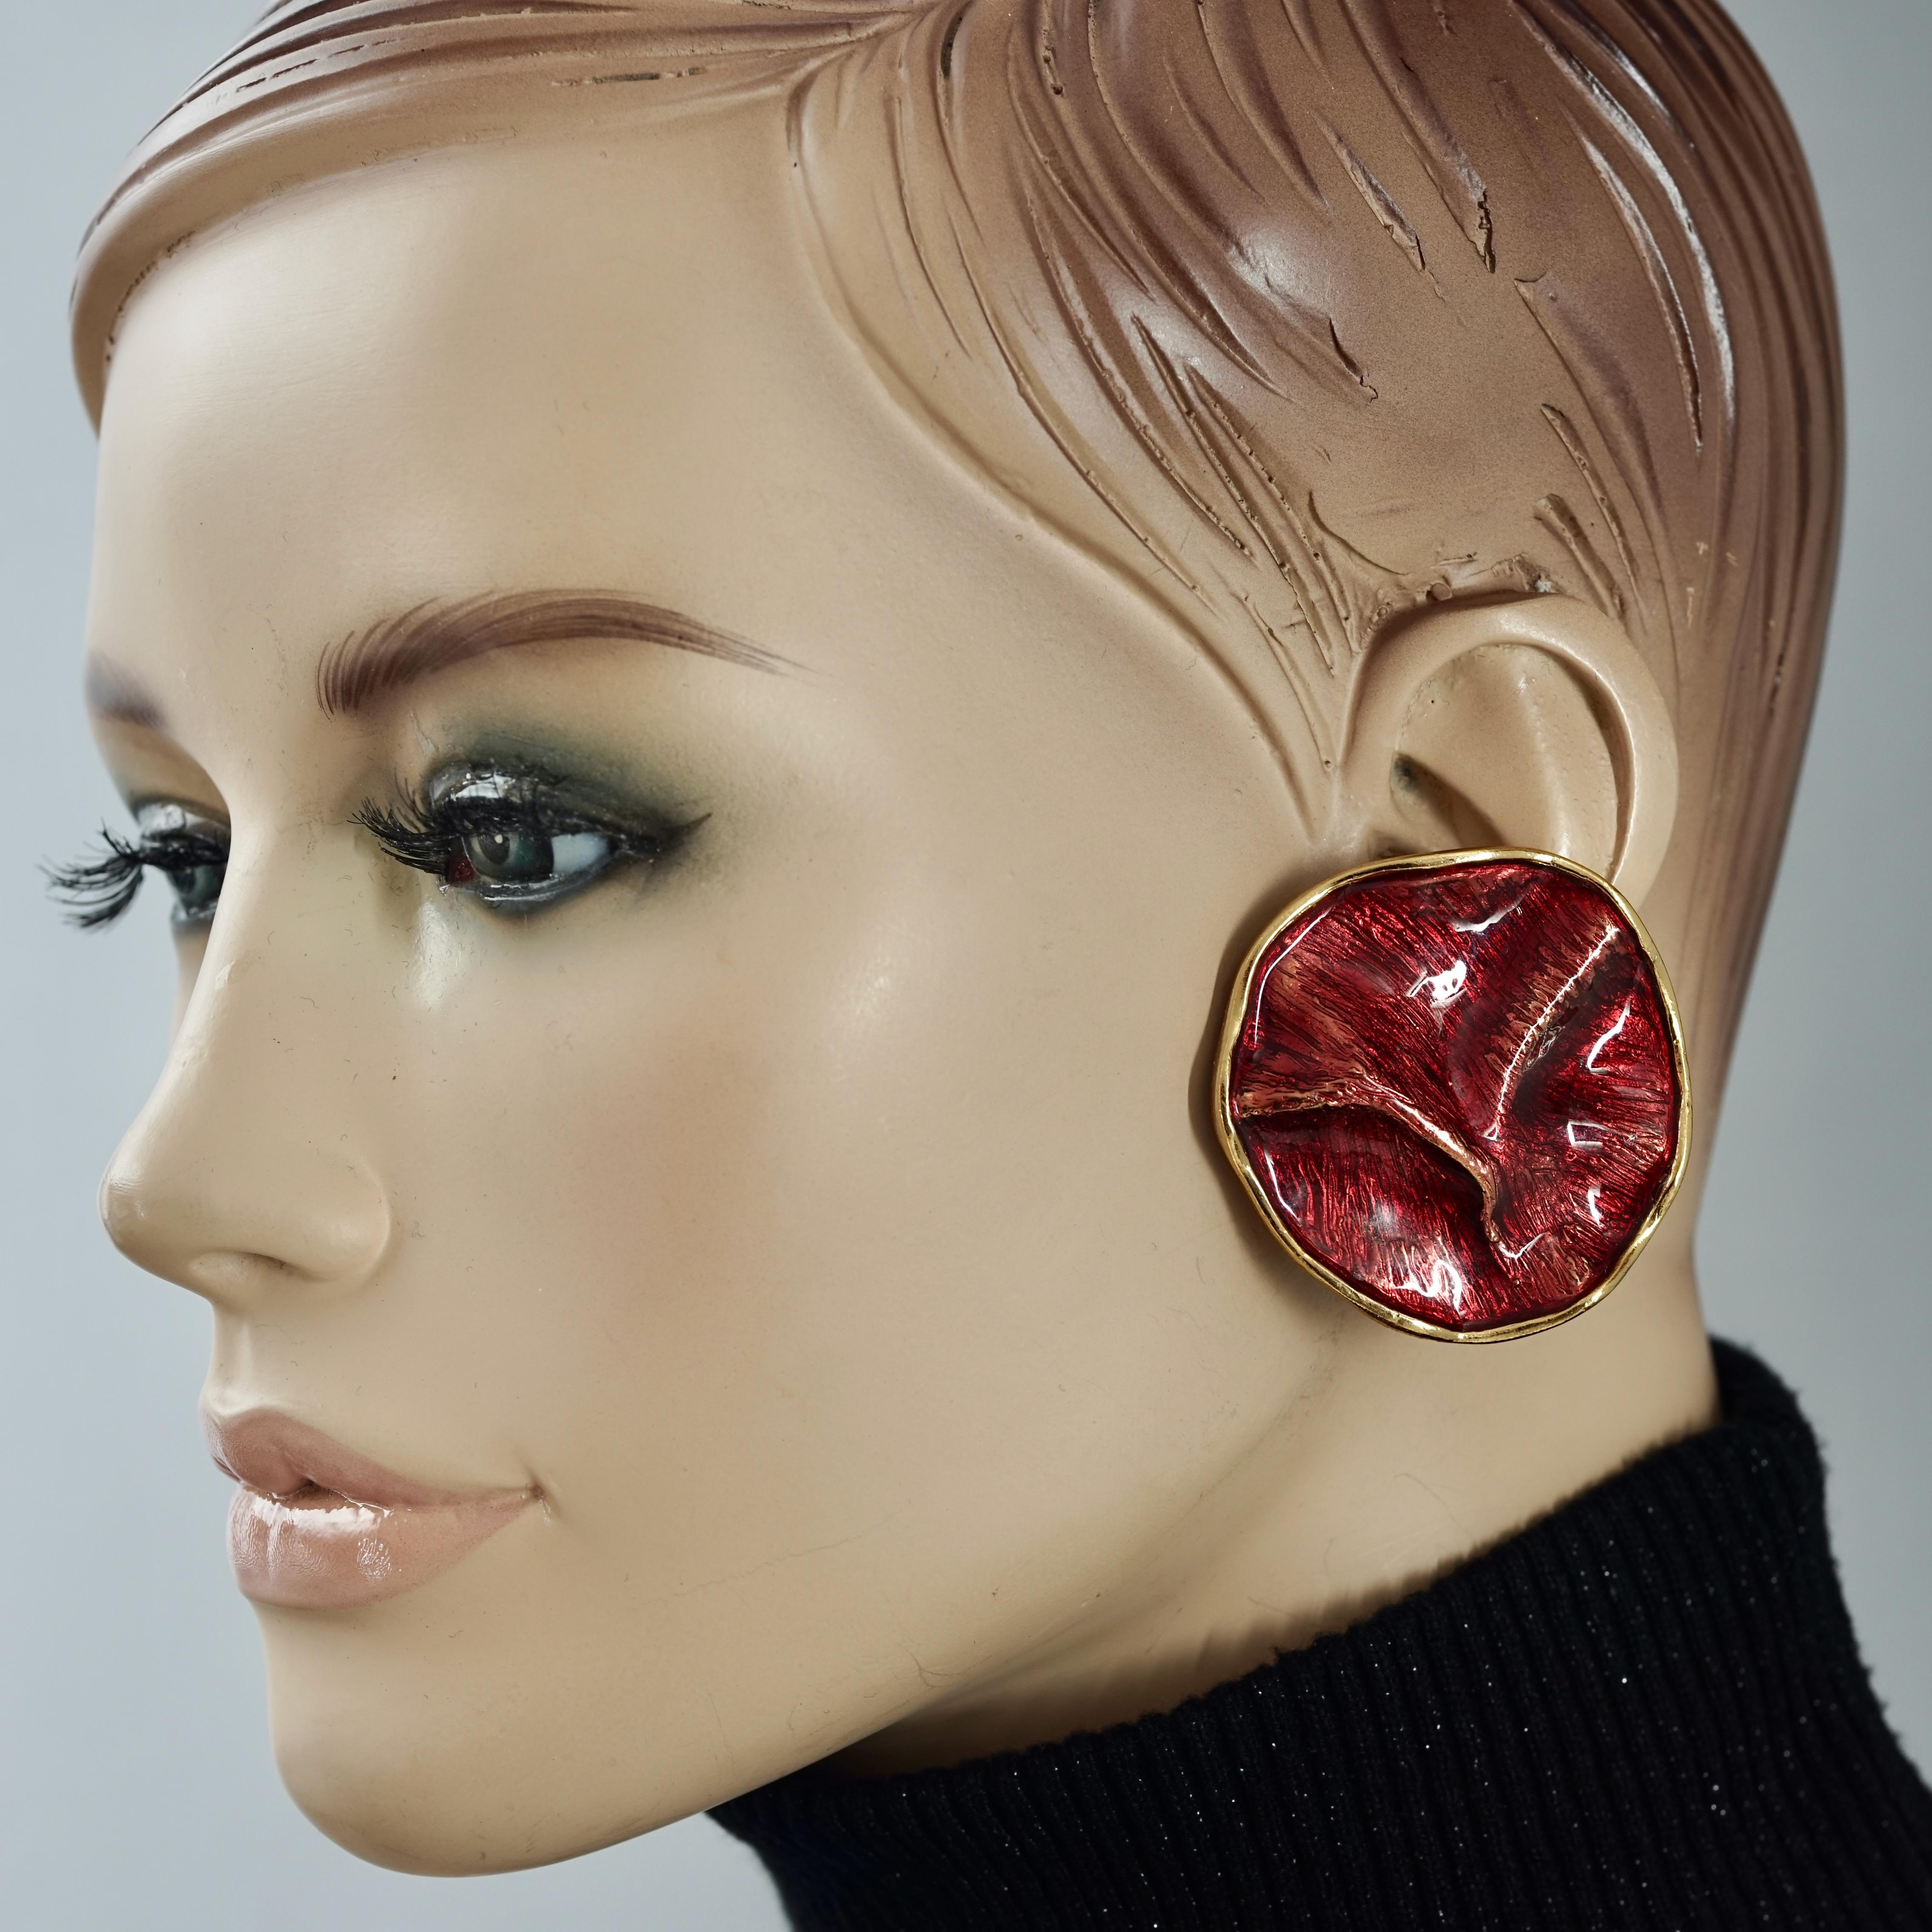 Vintage YVES SAINT LAURENT Ysl by Robert Goossens Wrinkled Red Enamel Disc Earrings

Measurements:
Height: 1.81 inches (4.6 cm)
Width: 1.81 inches (4.6 cm)
Weight per Earring: 25 grams

Features:
- 100% Authentic YVES SAINT LAURENT by Robert